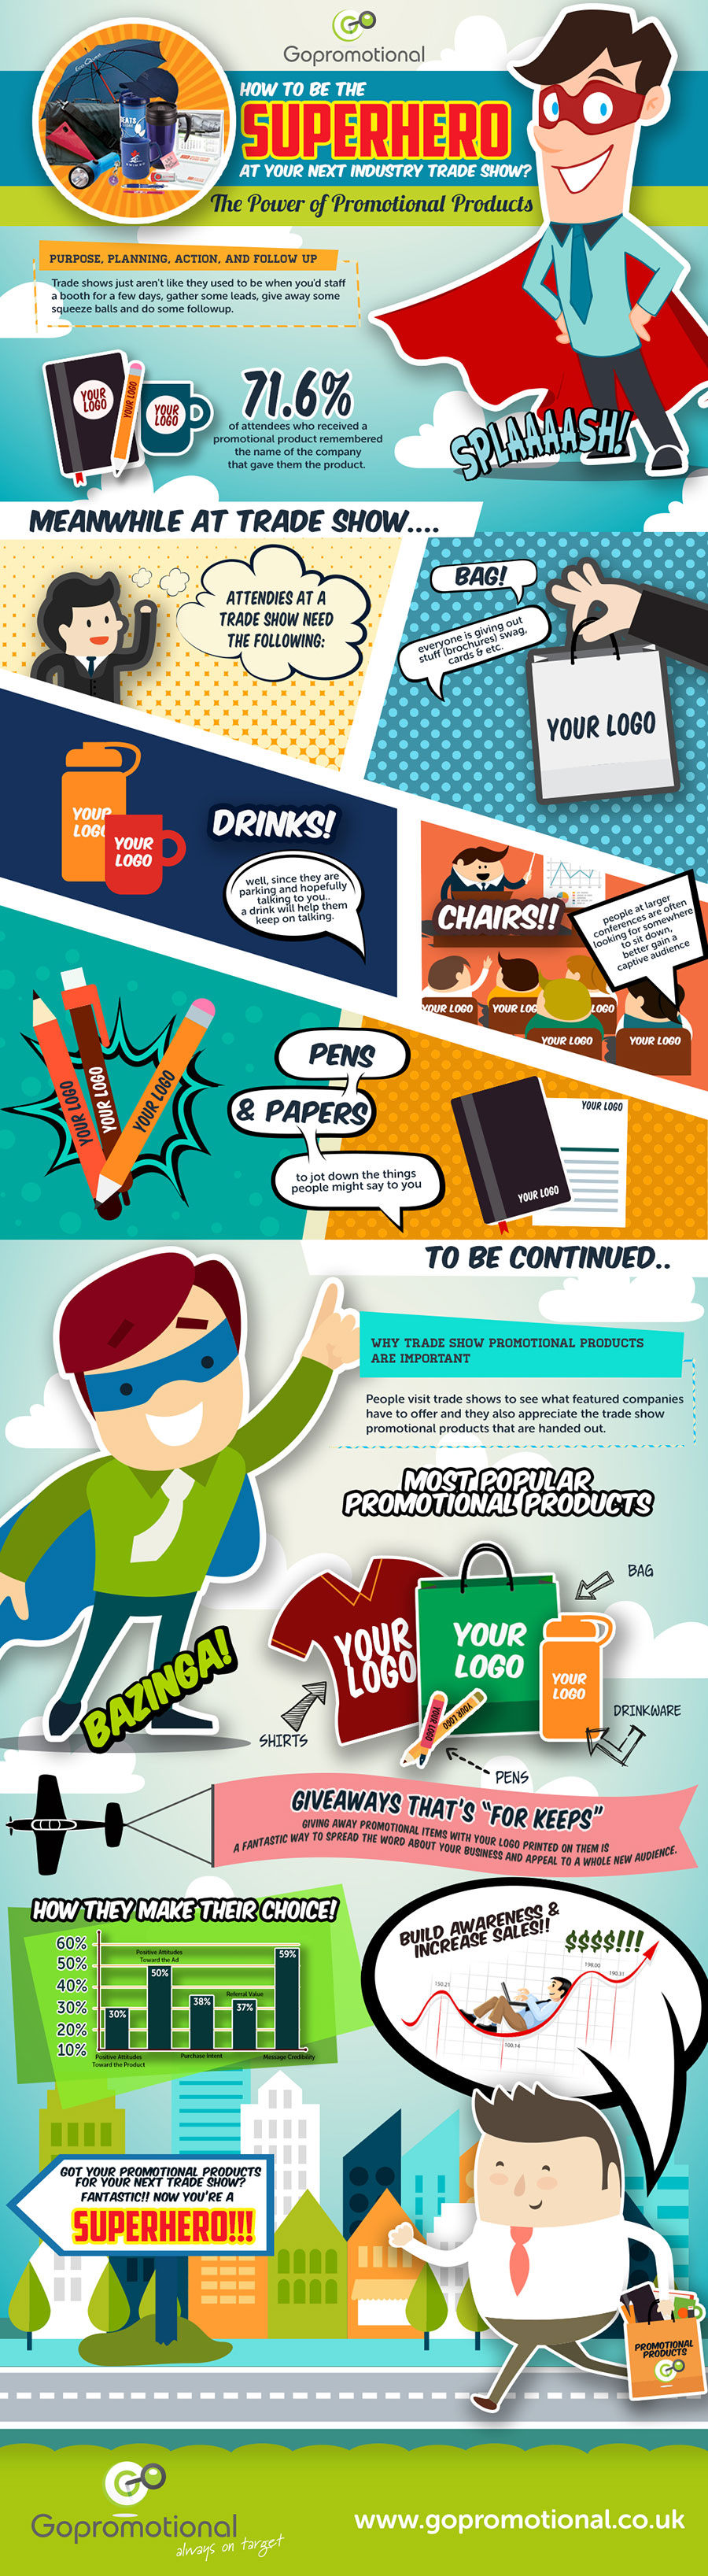 Promotional Products Superhero - Infographic